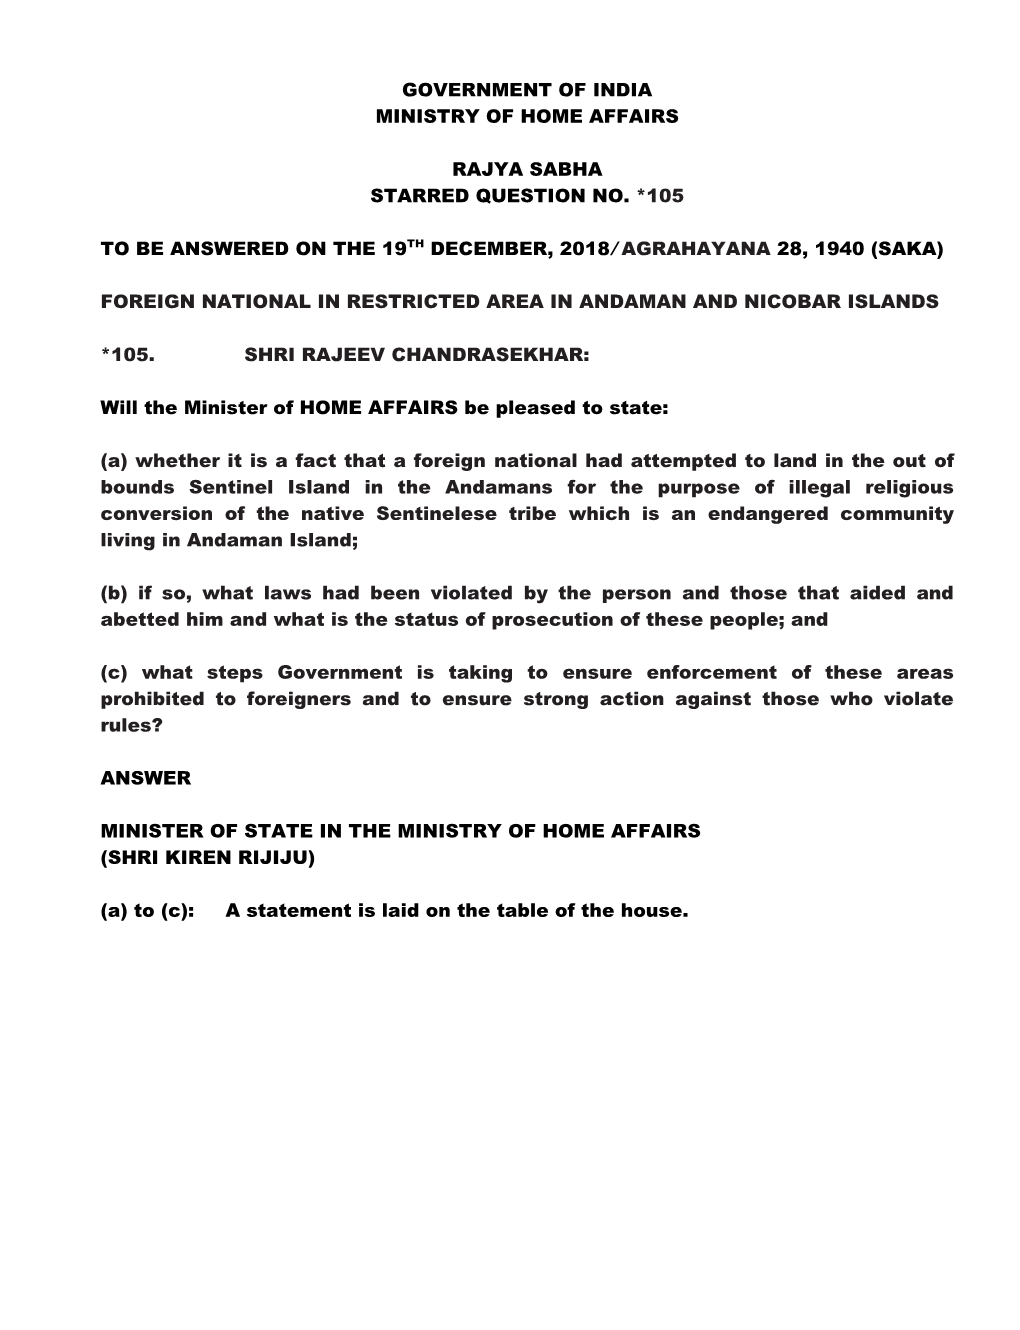 Government of India Ministry of Home Affairs Rajya Sabha Starred Question No. *105 to Be Answered on the 19Th December, 2018/ Ag